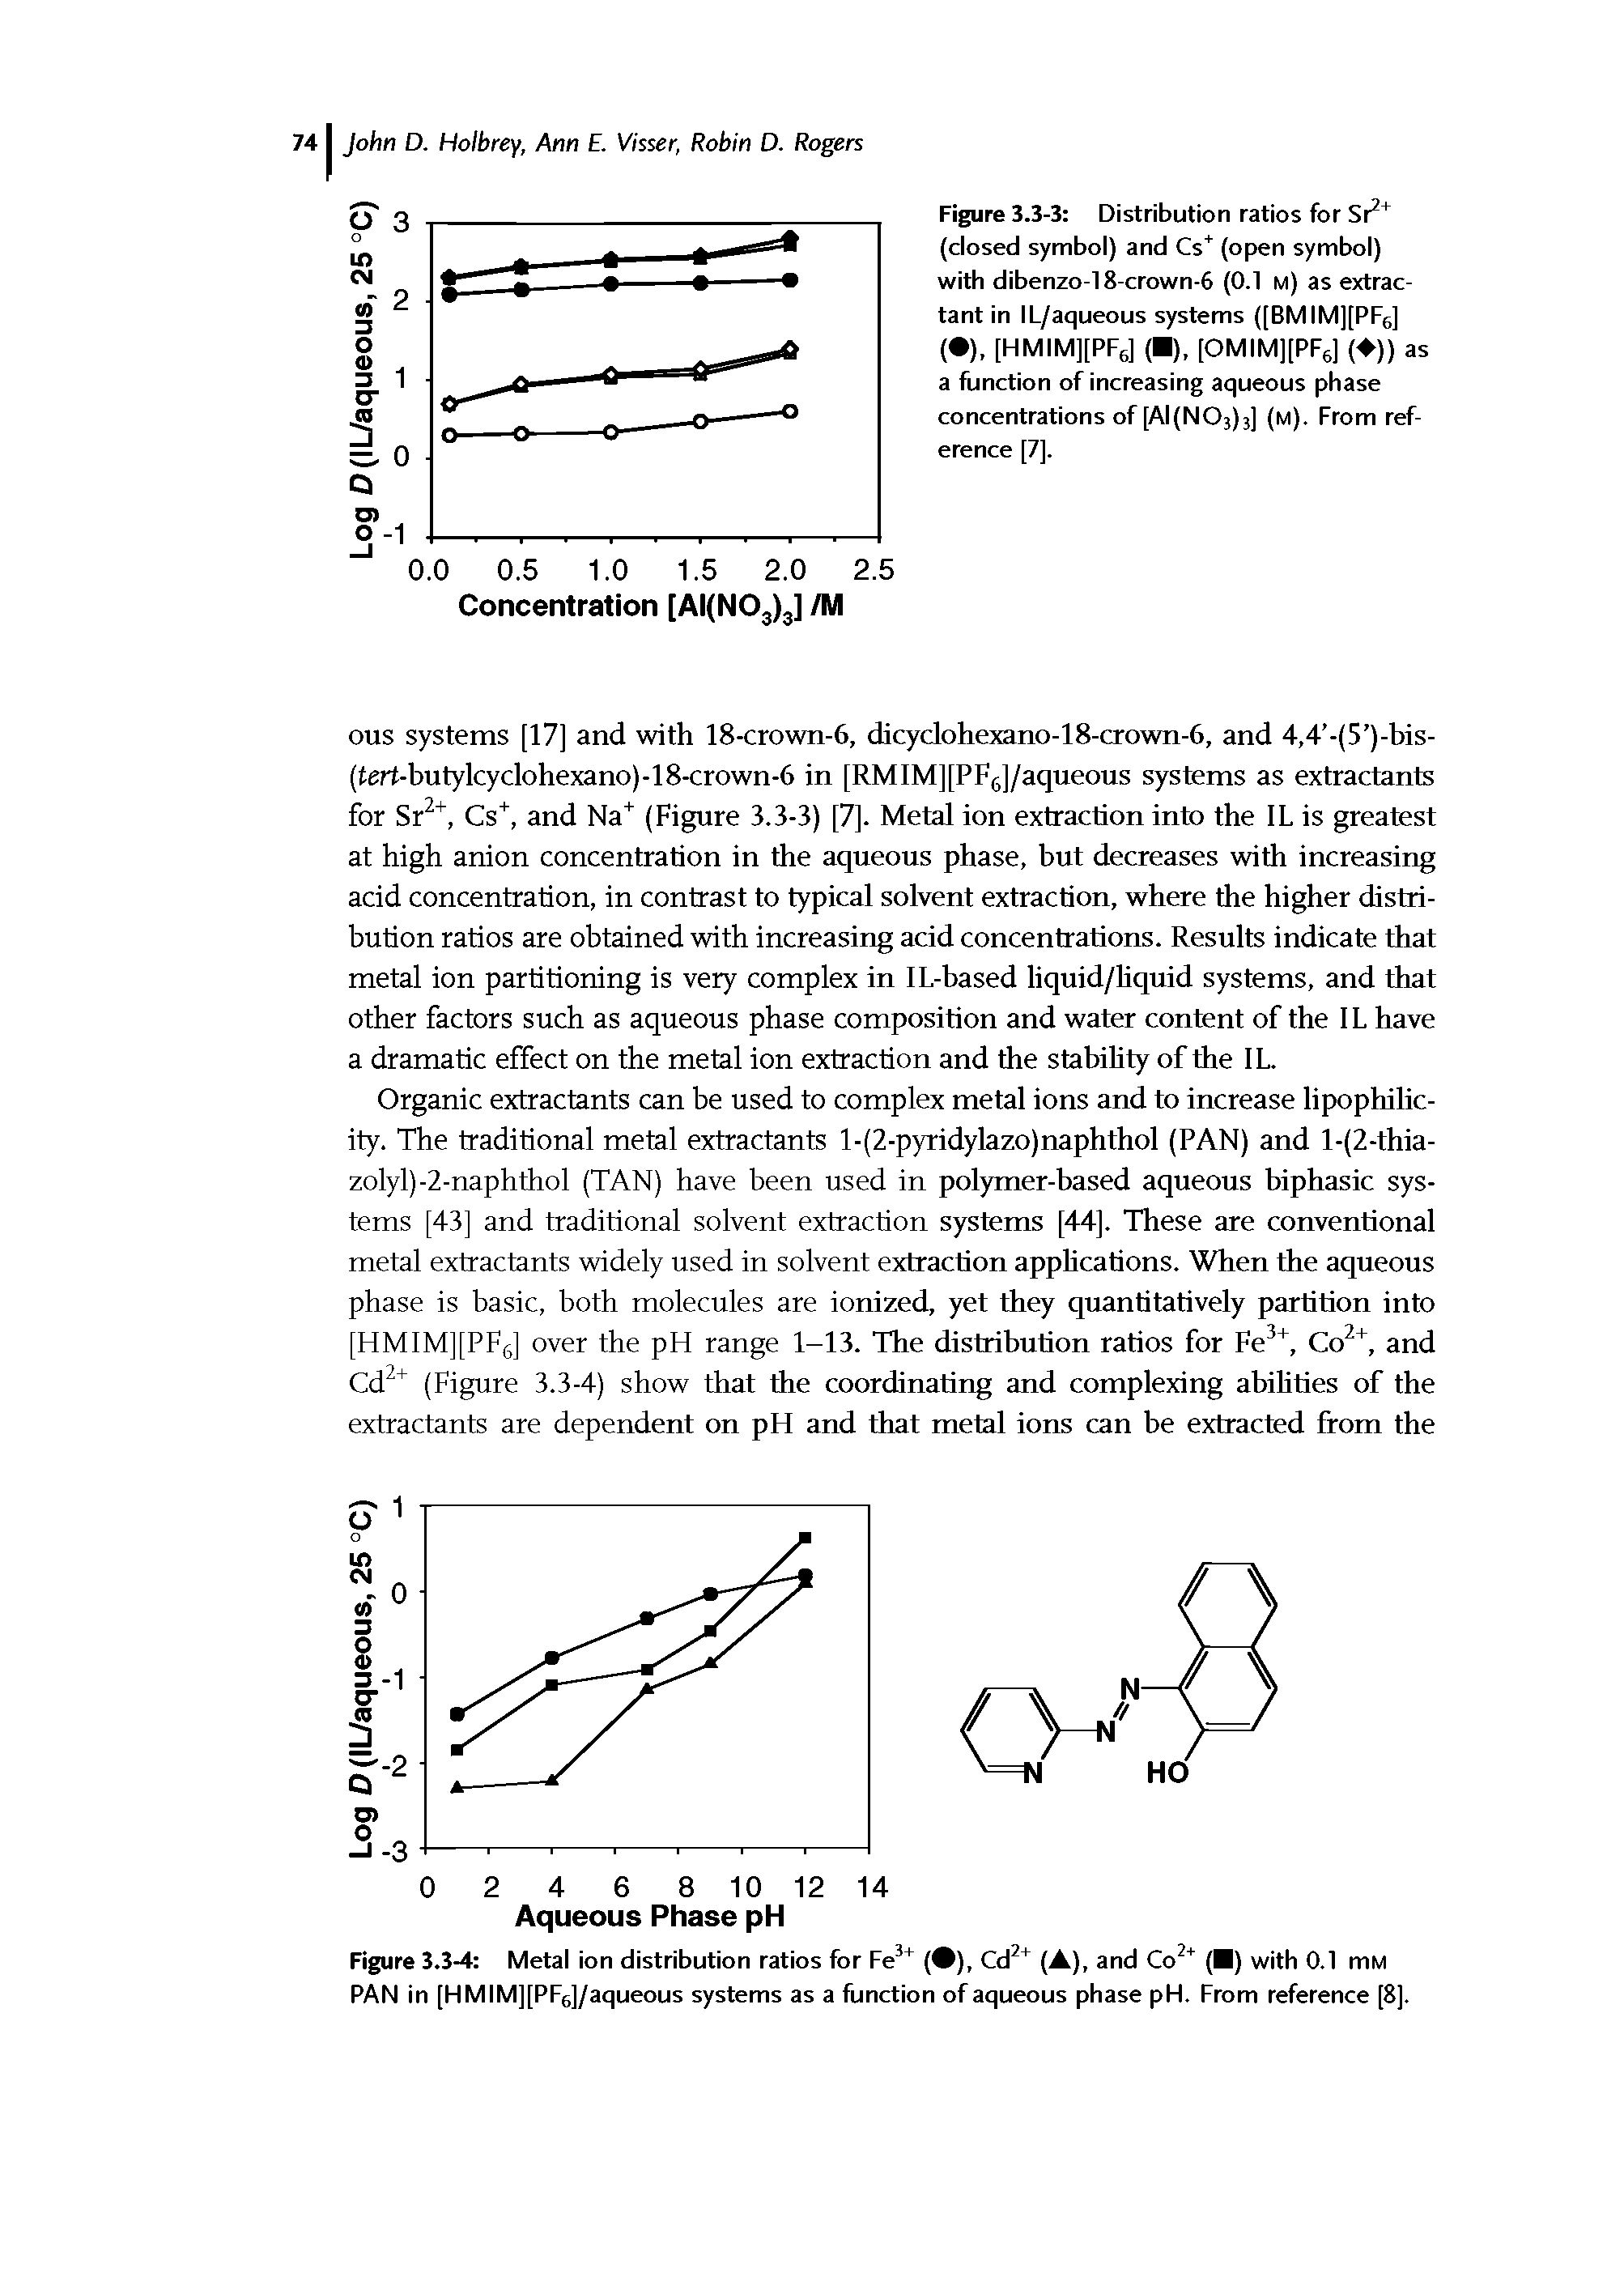 Figure 3.3-3 Distribution ratios for (closed symbol) and Cs (open symbol) with dibenzo-18-crown-6 (0.1 m) as extractant in IL/aqueous systems ([BMIM][PF6] ( ), [HMIM][PFd ( ), [OMIM][PFe] ( )) as a function of increasing aqueous phase concentrations of [AI(N03)3] (m). From reference [7].